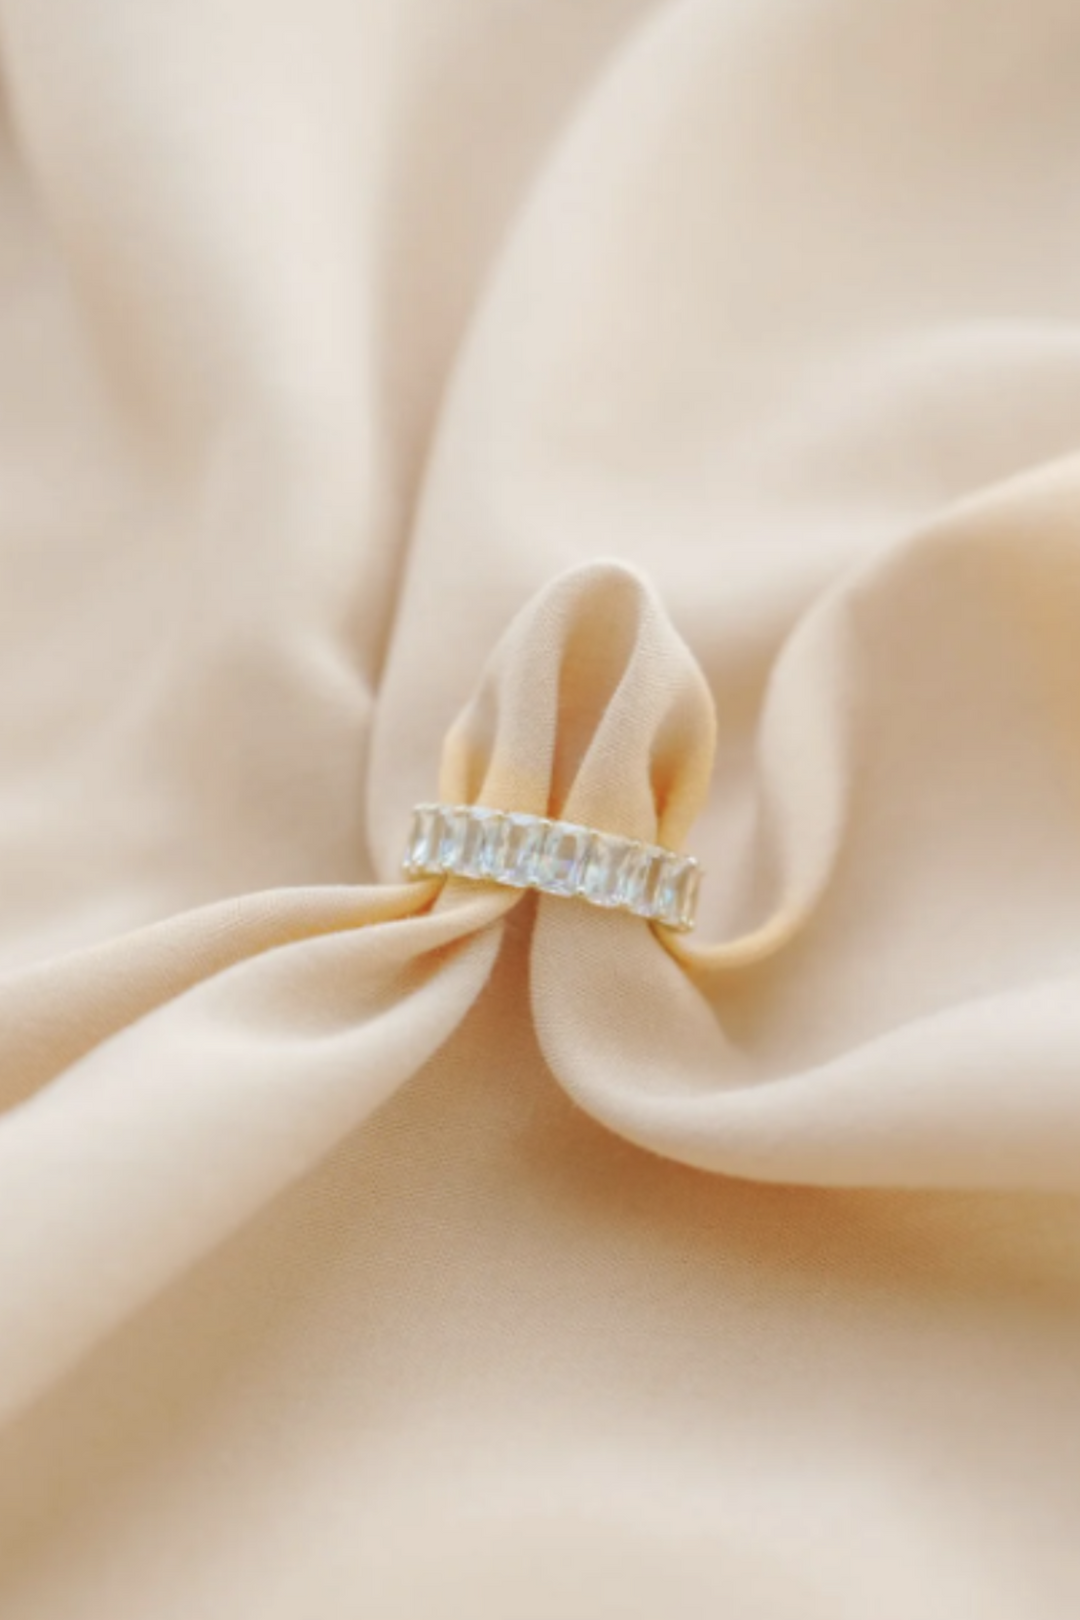 The "Carter" Ring